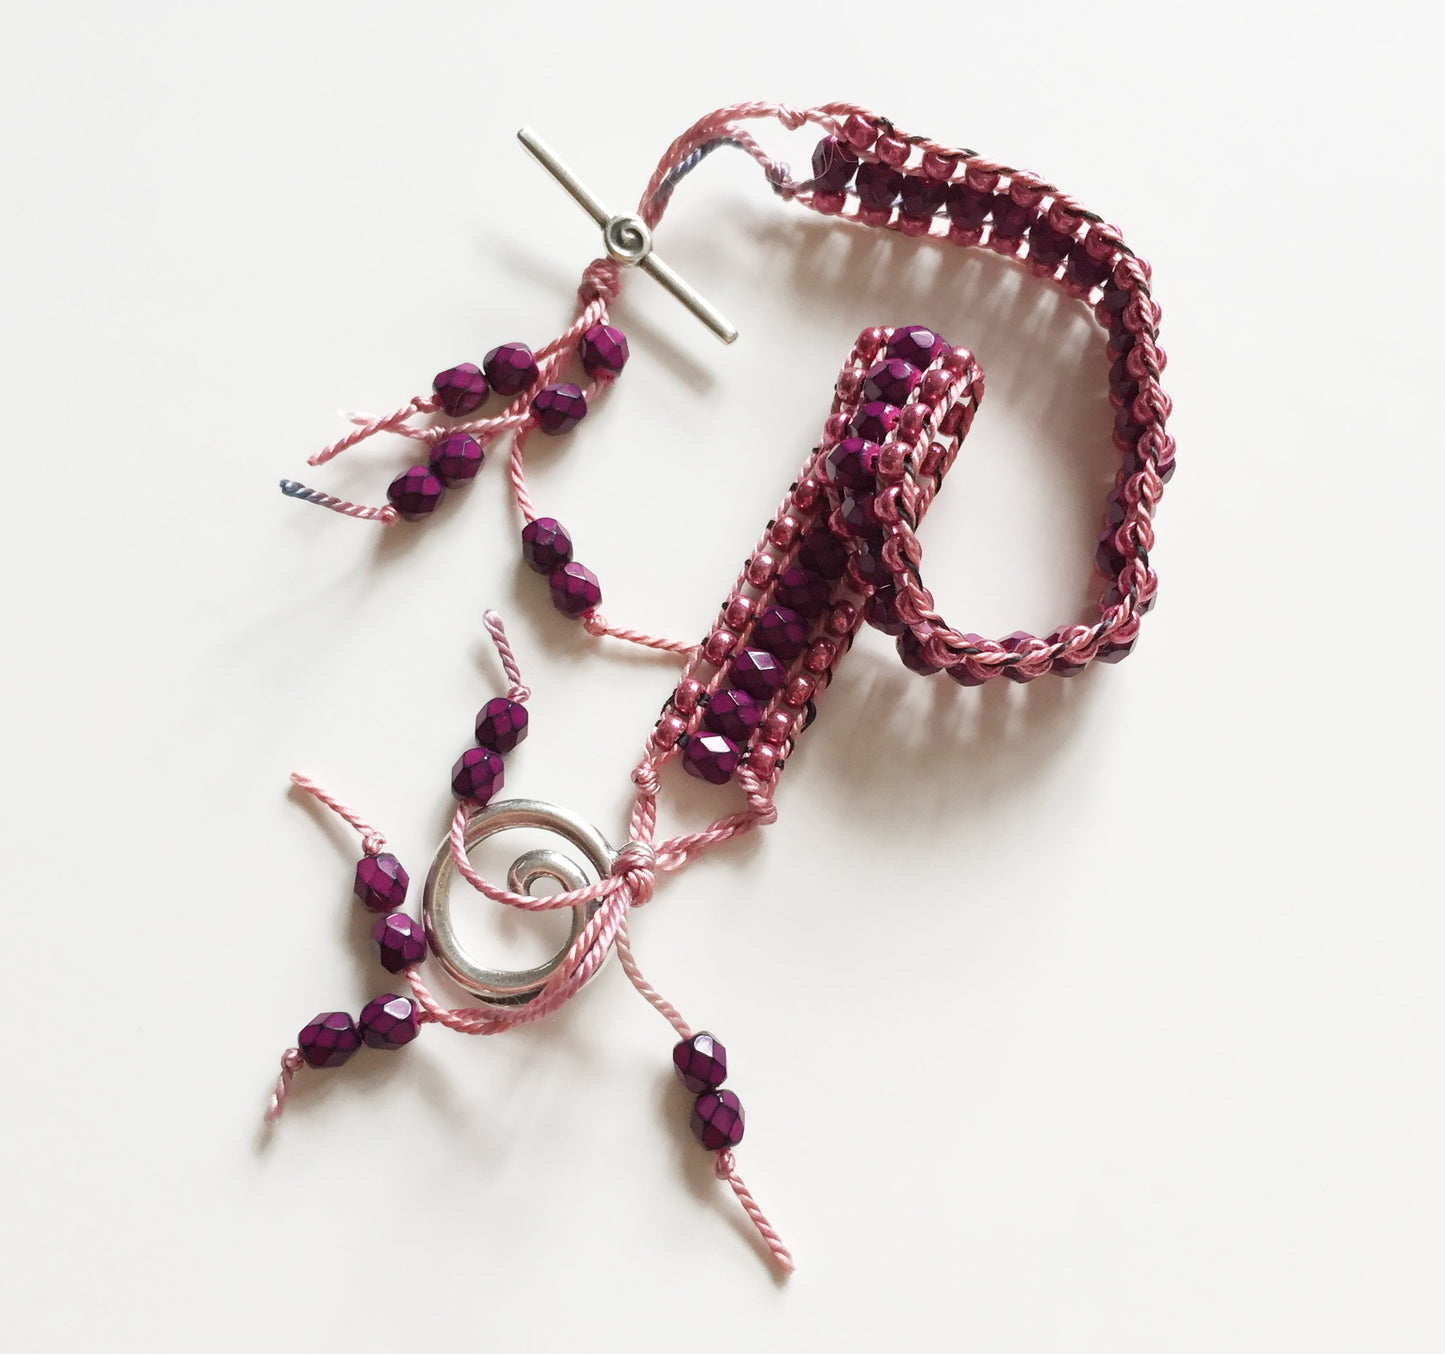 Anyone Can Do It: Bead Weaving For Beginners (Live Demo)